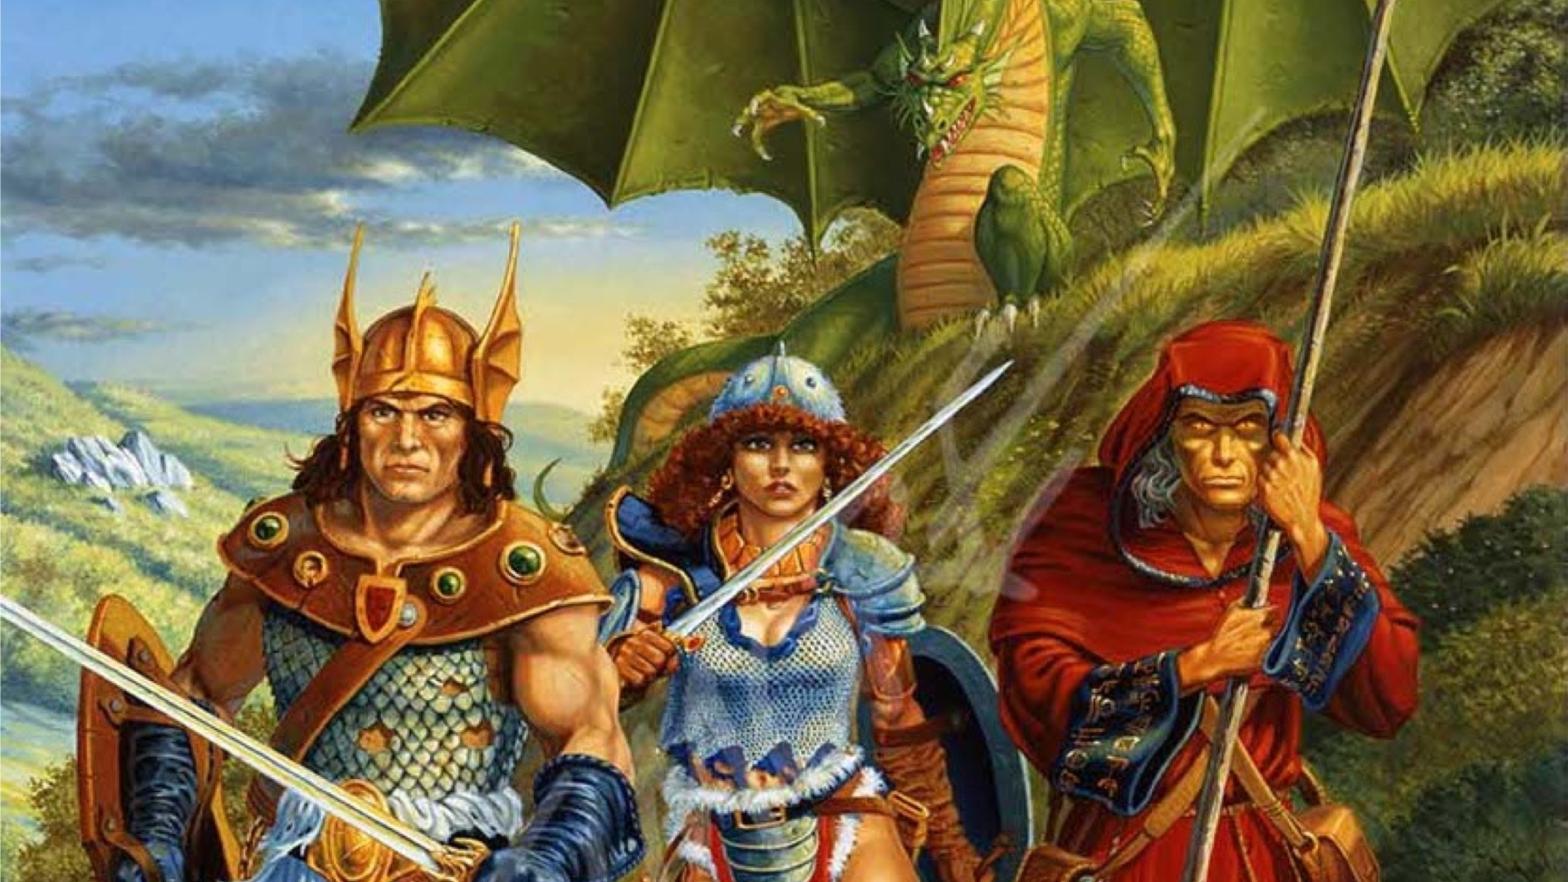 Inset of original cover to Dragons of Spring Dawning by Larry Elmore. From l-r: Caramon, Tika, and Raistlin. (Image: Wizards of the Coast)